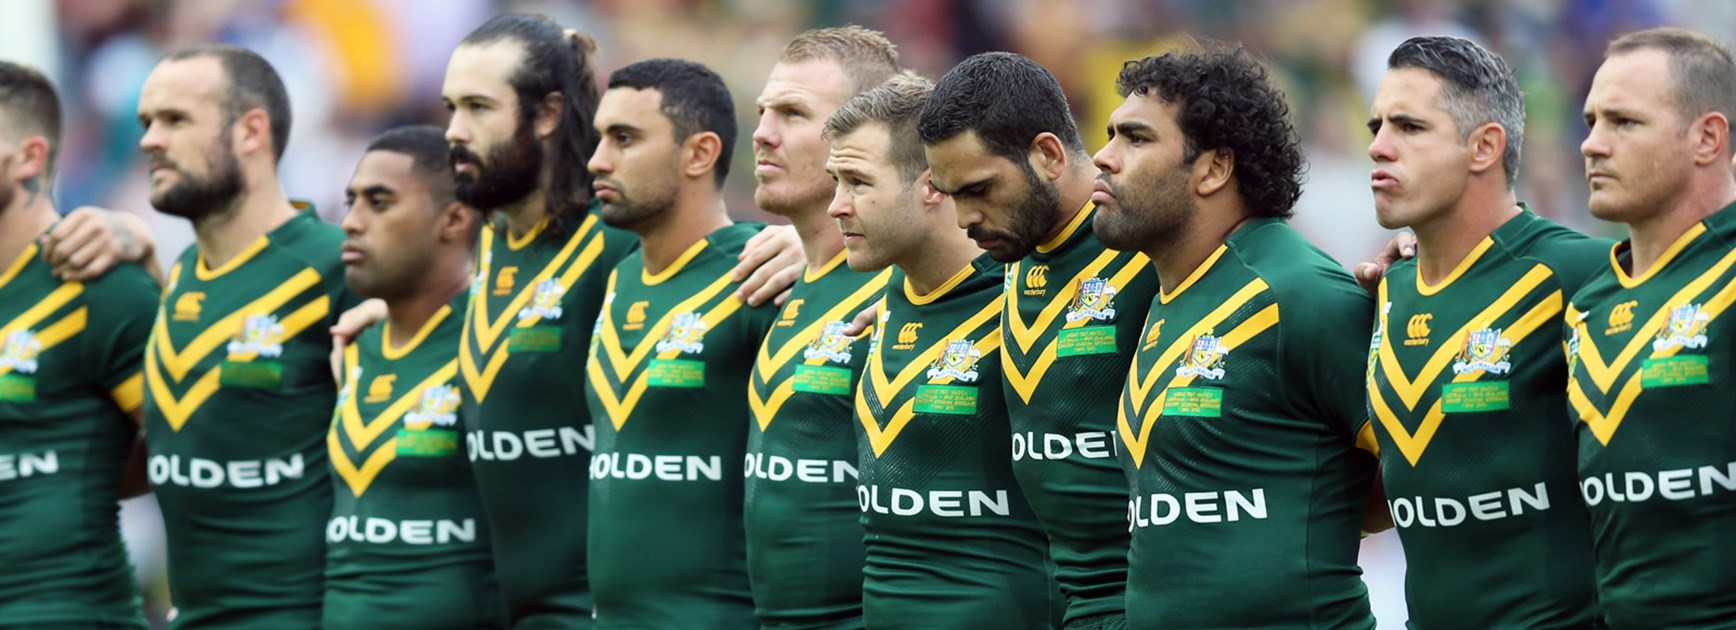 It remains to be seen who will coach the Kangaroos in 2016 and beyond.